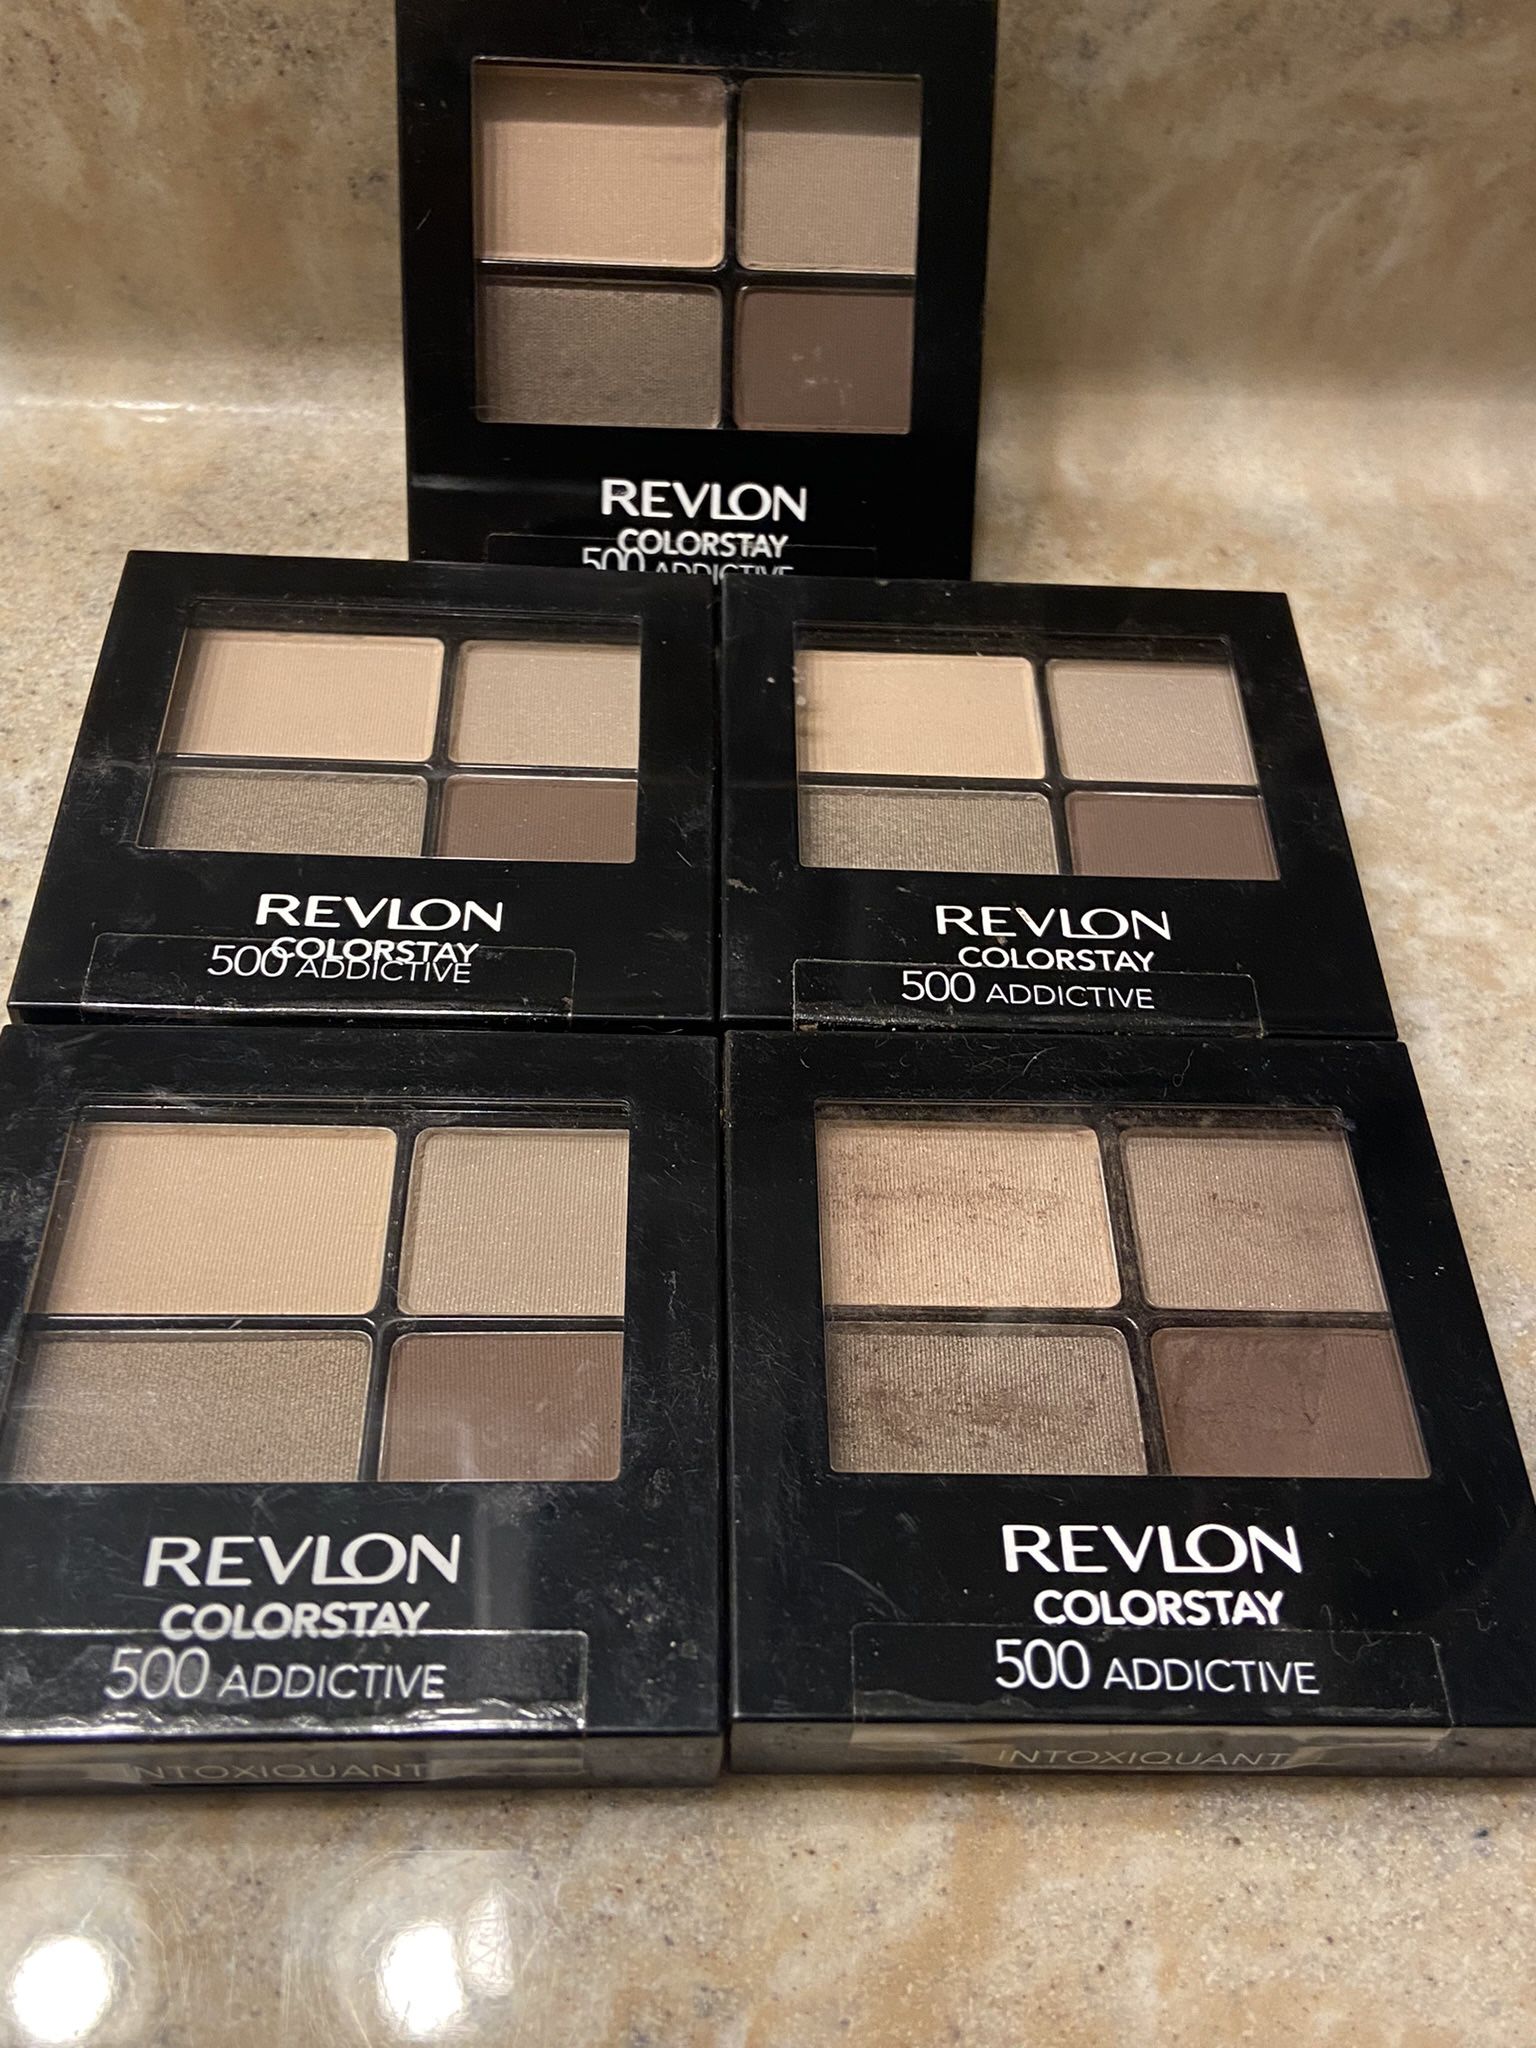 5 Revlon ColorStay 4 Shade Eyeshadow Compact. #500 Addictive. ALL NEW/SEALED. Porch Pick Up Dublin. (See pic…one compact has a single shadow that is c